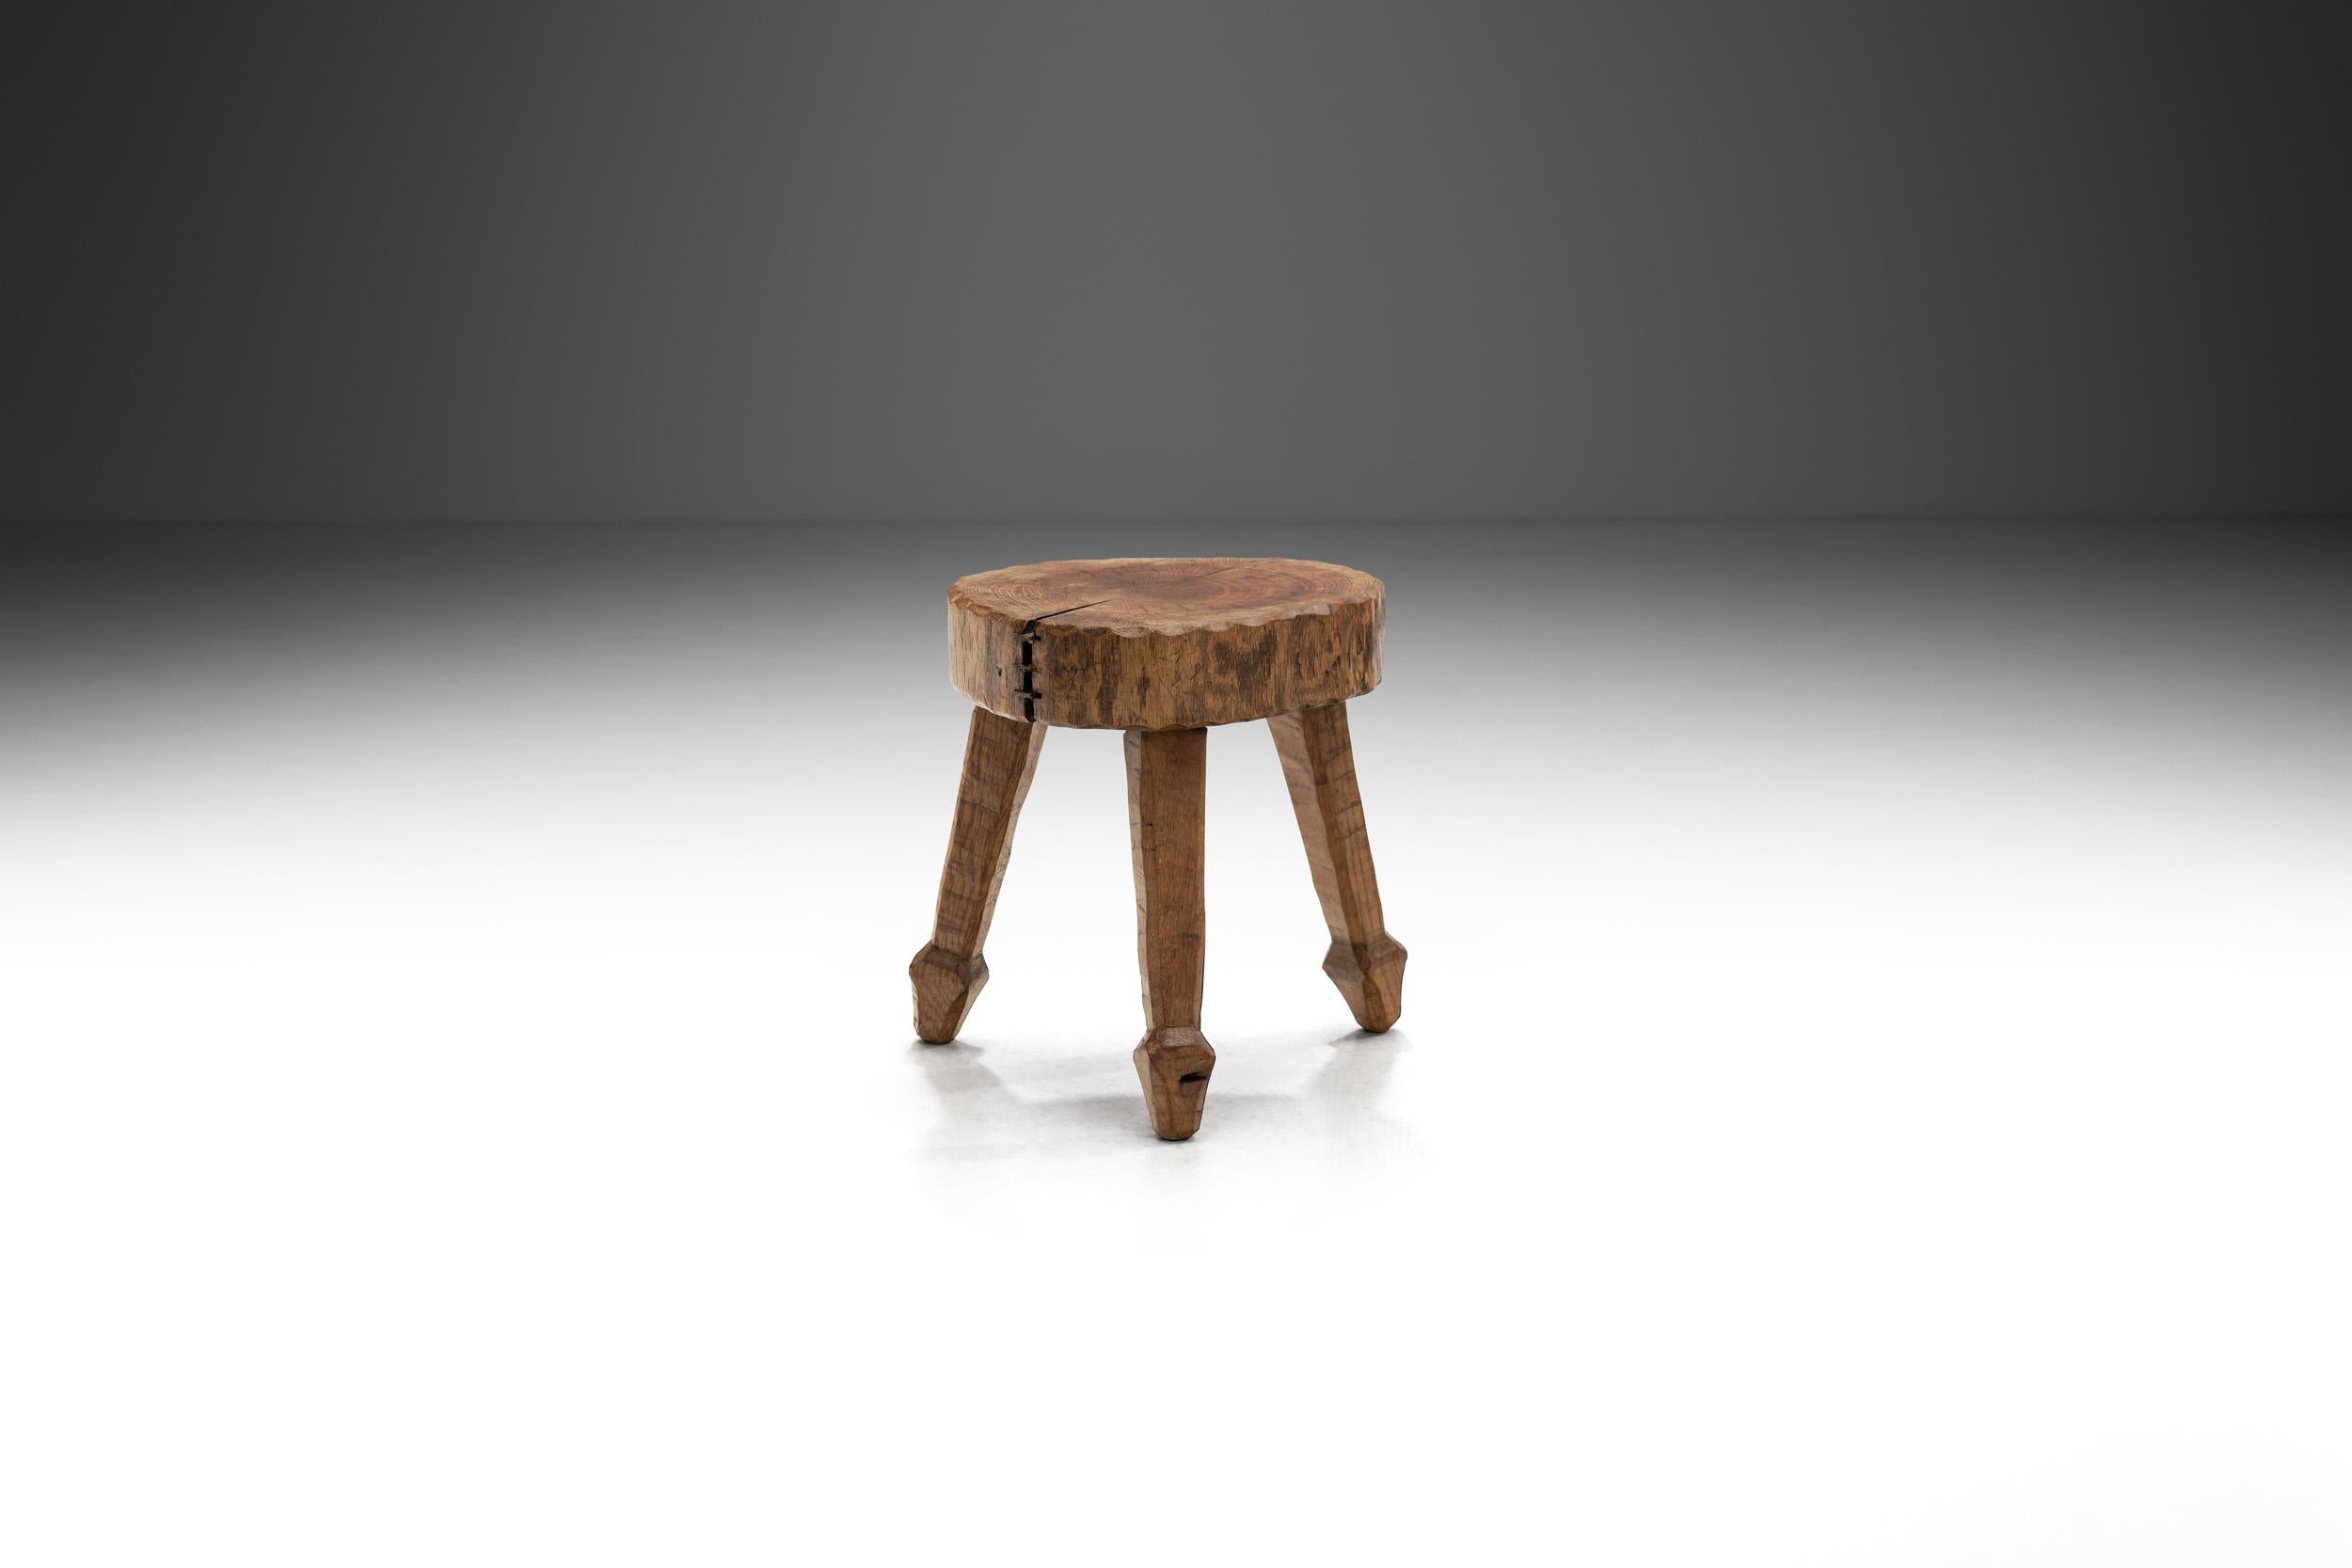 In the dimly lit corners of mid 20th century, Belgian craftsmanship emerged the brutalist movement. This solid oak wood stool, crafted during the 1950s, stands as a tangible embodiment of the brutalist architectural tenets that swept through the